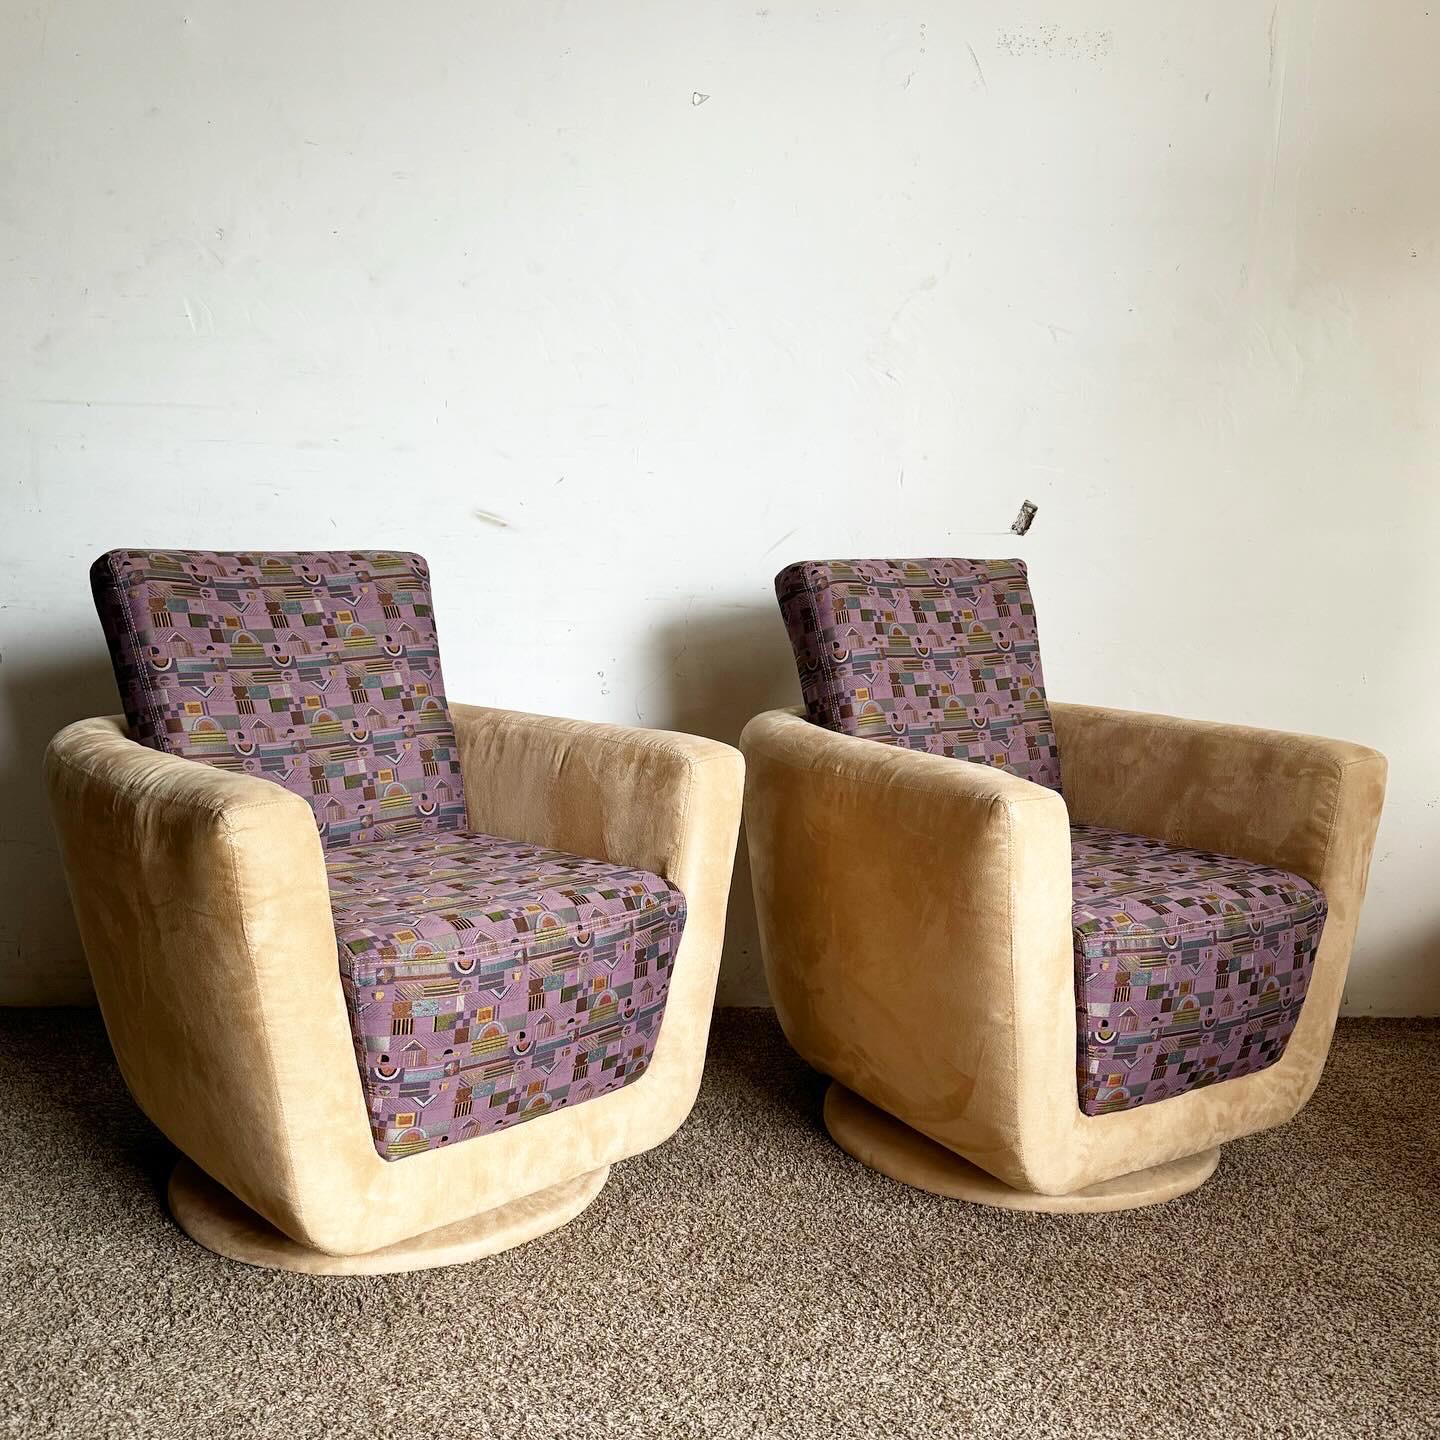 Revamp your living area with these Postmodern Swivel Lounge Chairs, a fusion of comfort and style with tan microfiber and purple patterns. Ideal for modern interiors, they offer 360-degree swivel functionality, ergonomic design, and serve as